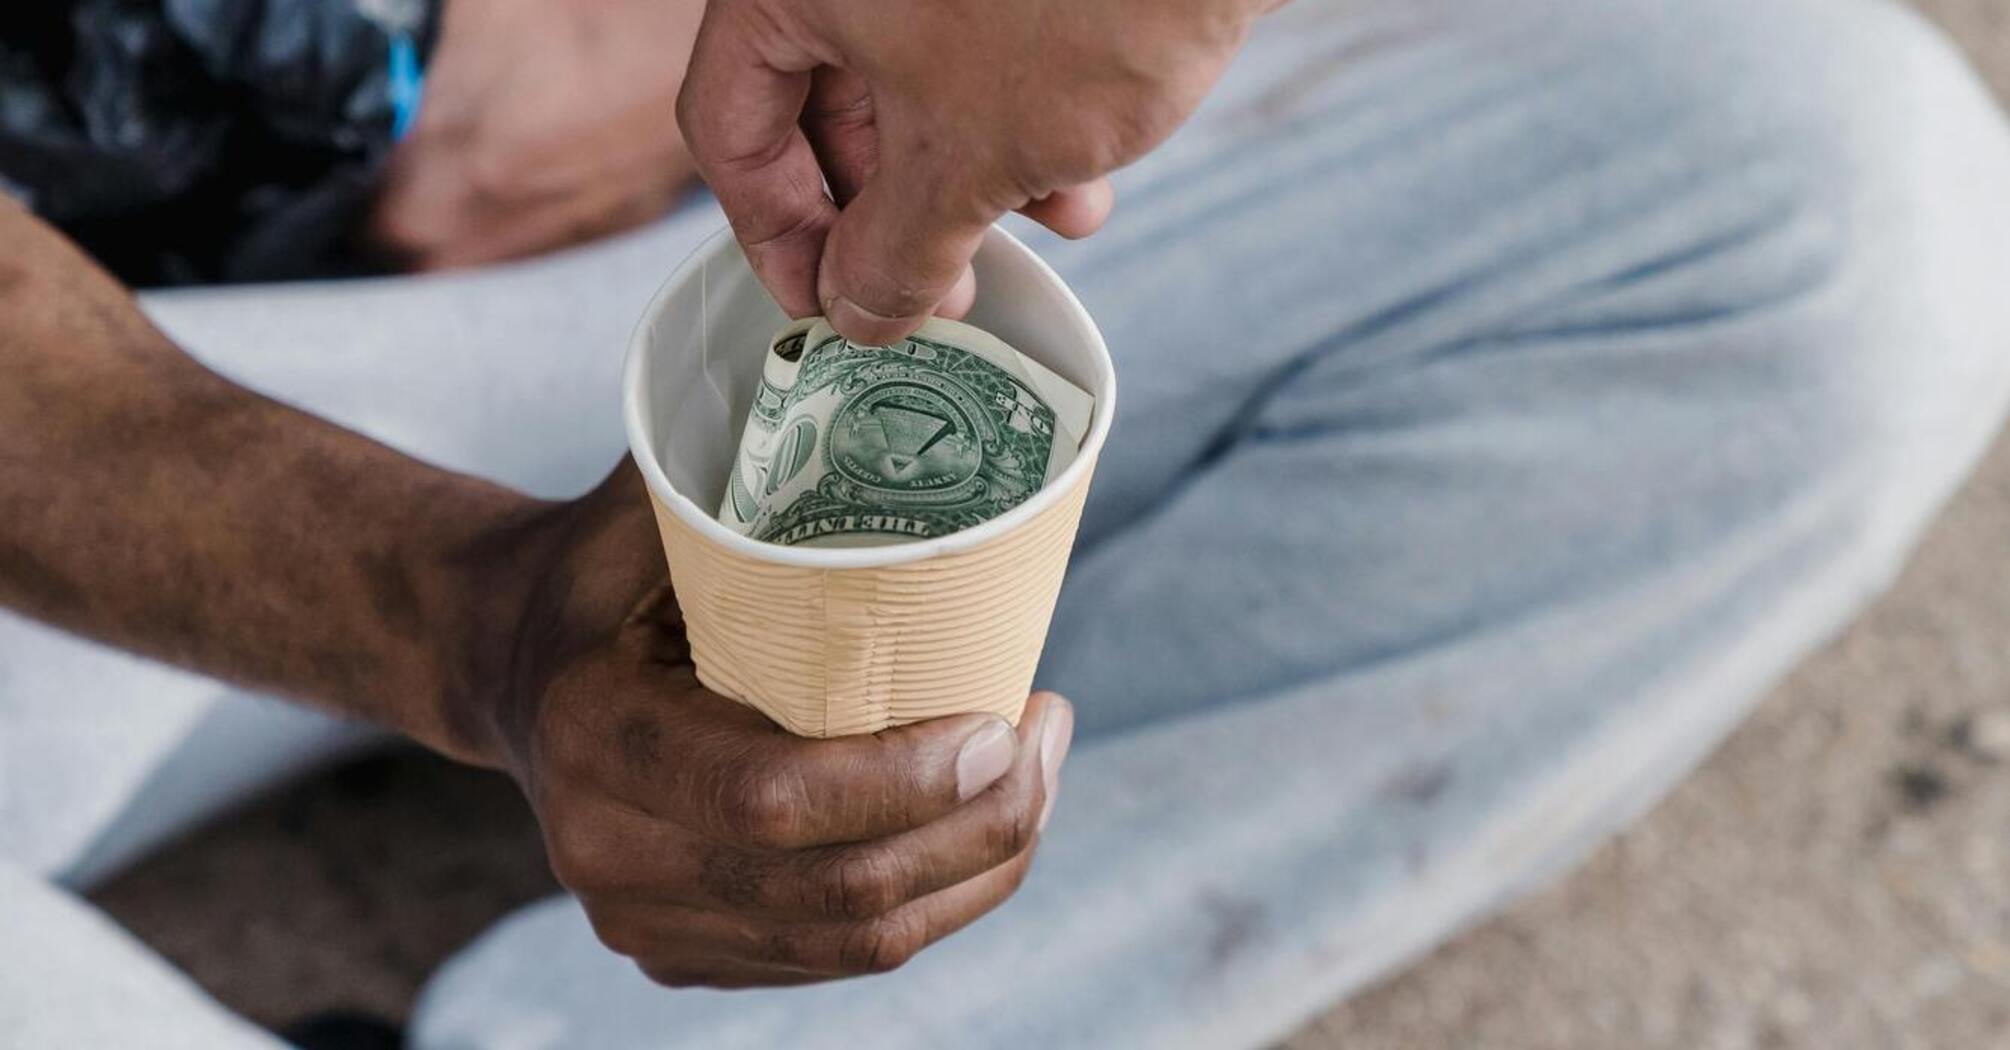 "The homeless man" who collects food  from the trash turned out to be a millionaire